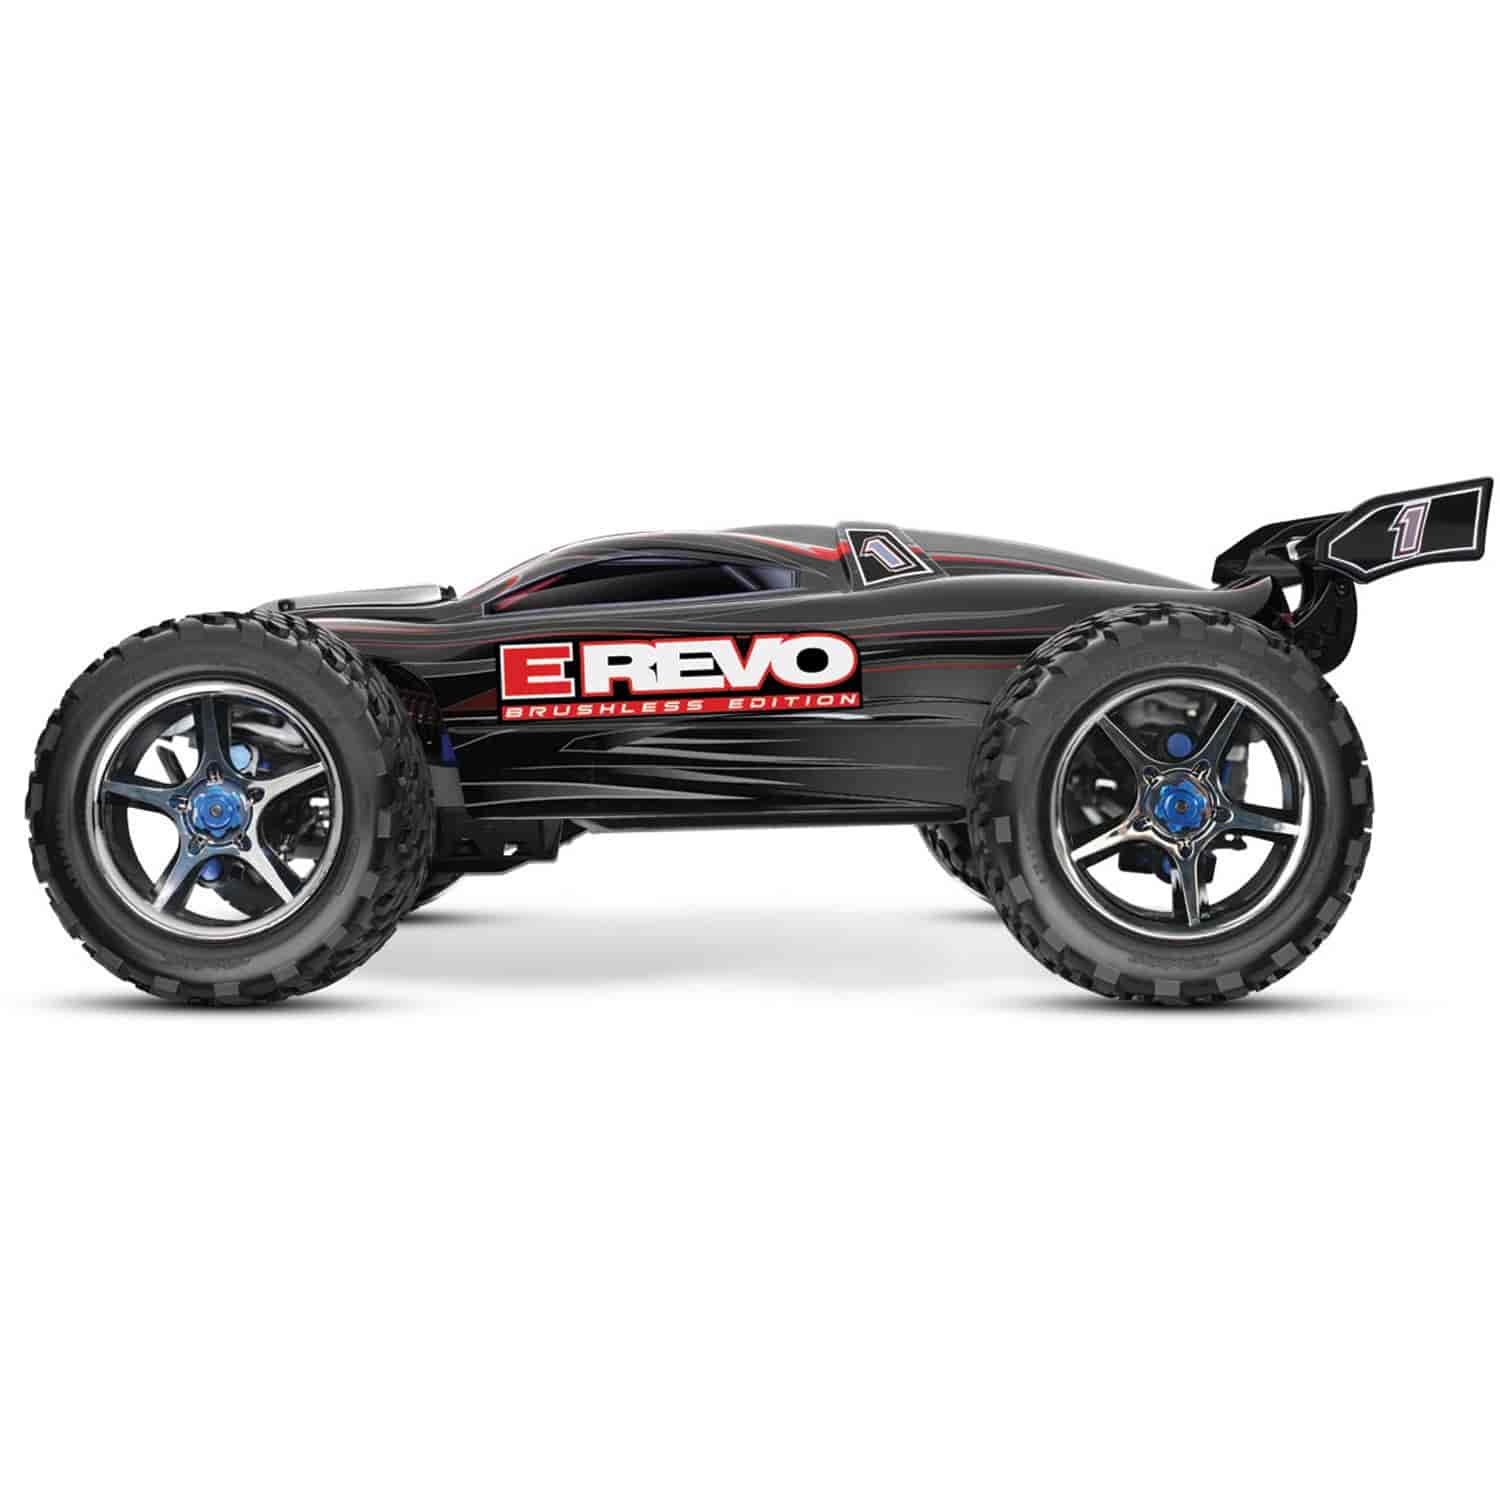 E-Revo Brushed Truck Fully Assembled, Ready-To-Race